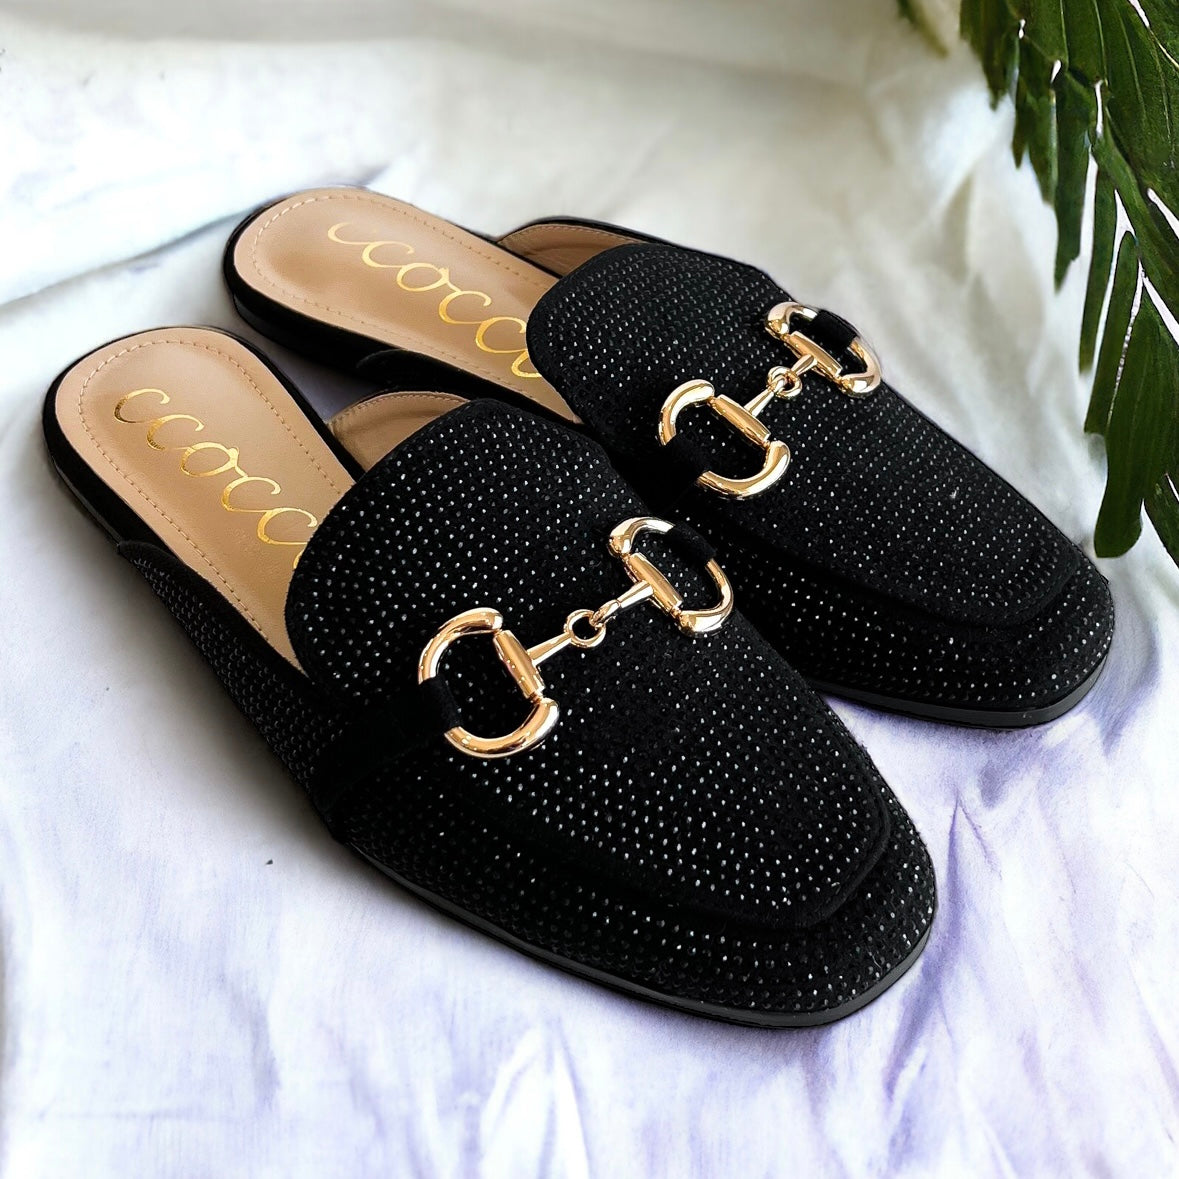 Horsebit Bejeweled Loafer Mule - Black-250 Shoes-CCOCCI-Coastal Bloom Boutique, find the trendiest versions of the popular styles and looks Located in Indialantic, FL